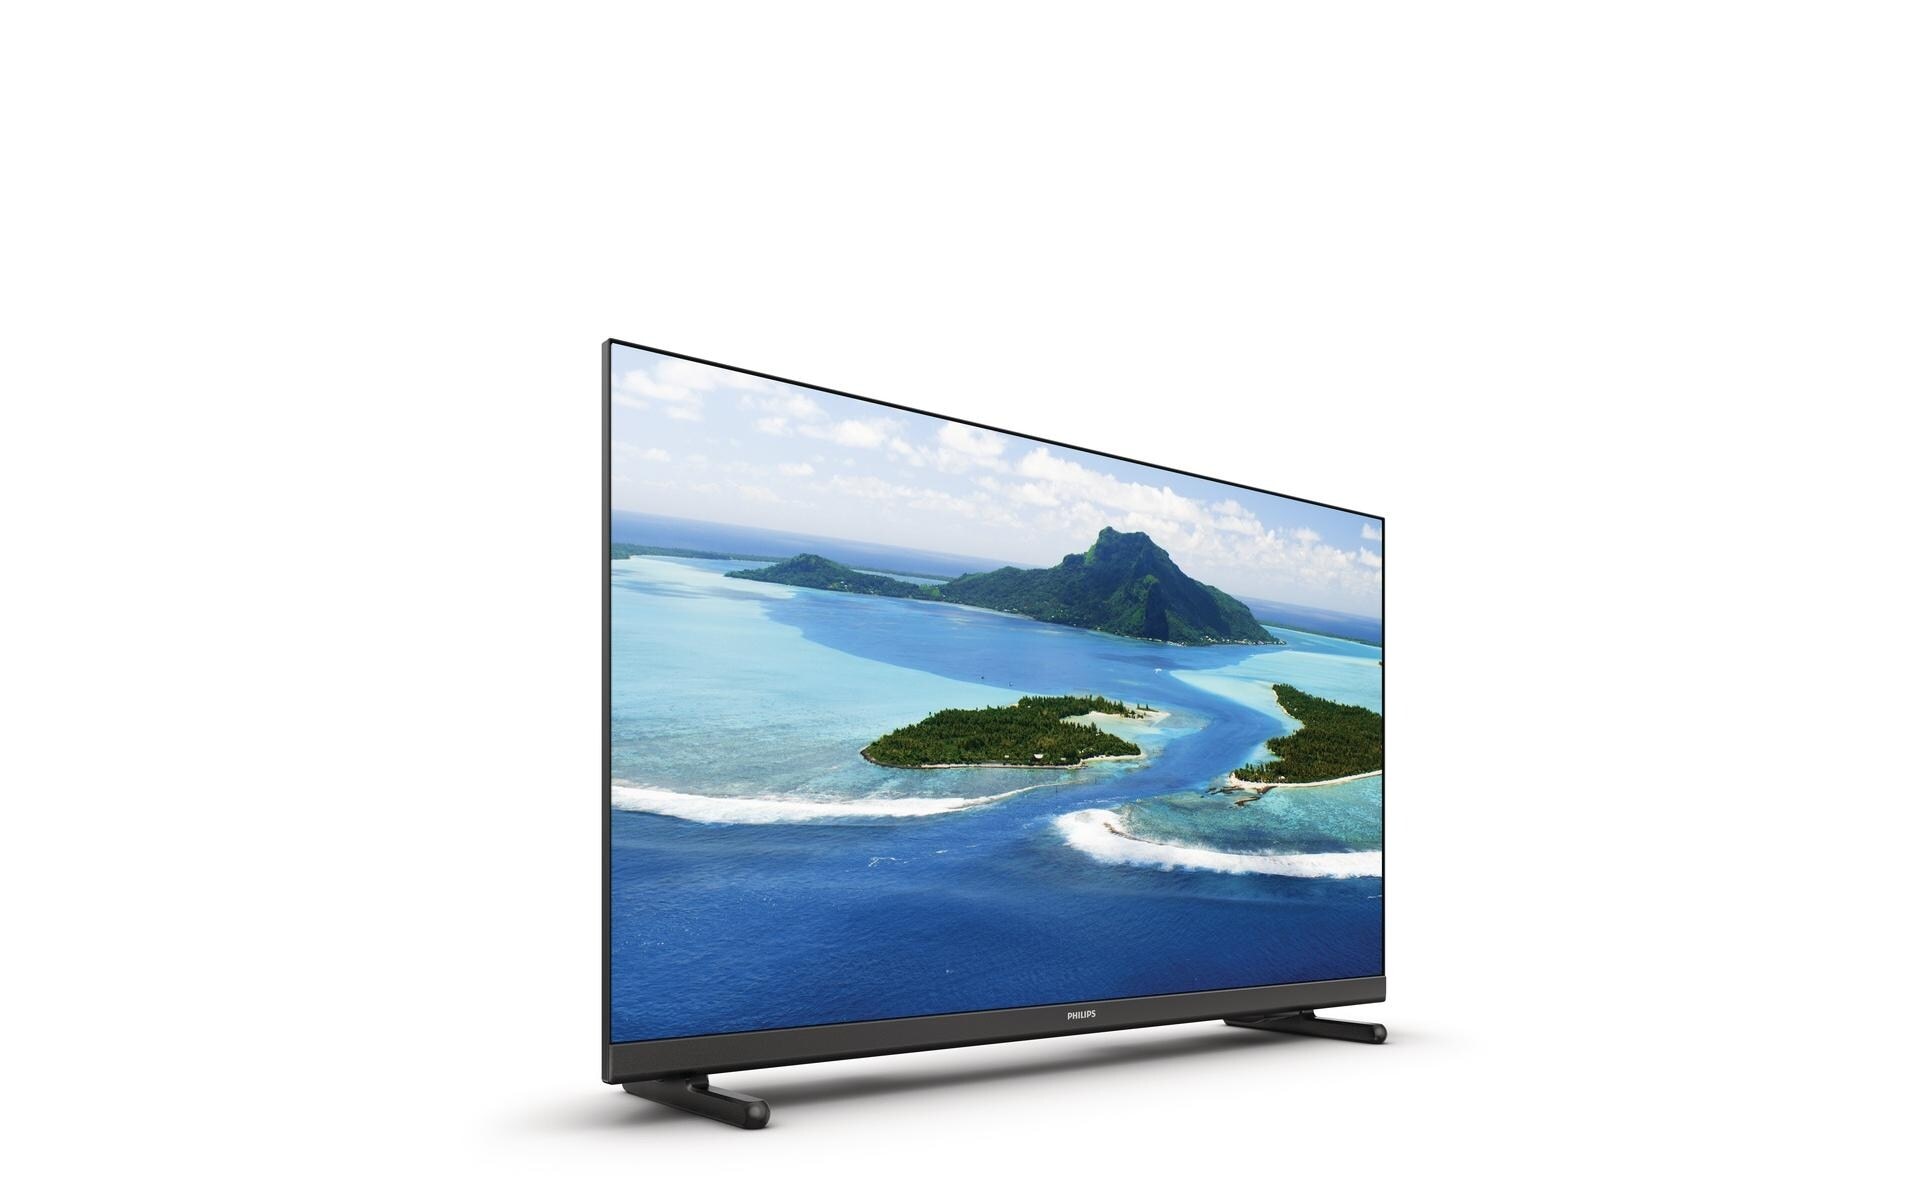 Philips LCD-LED Fernseher »24PHS5507/12, 24 LED-«, 60 cm/24 Zoll, WXGA  Trouver sur | alle Fernseher